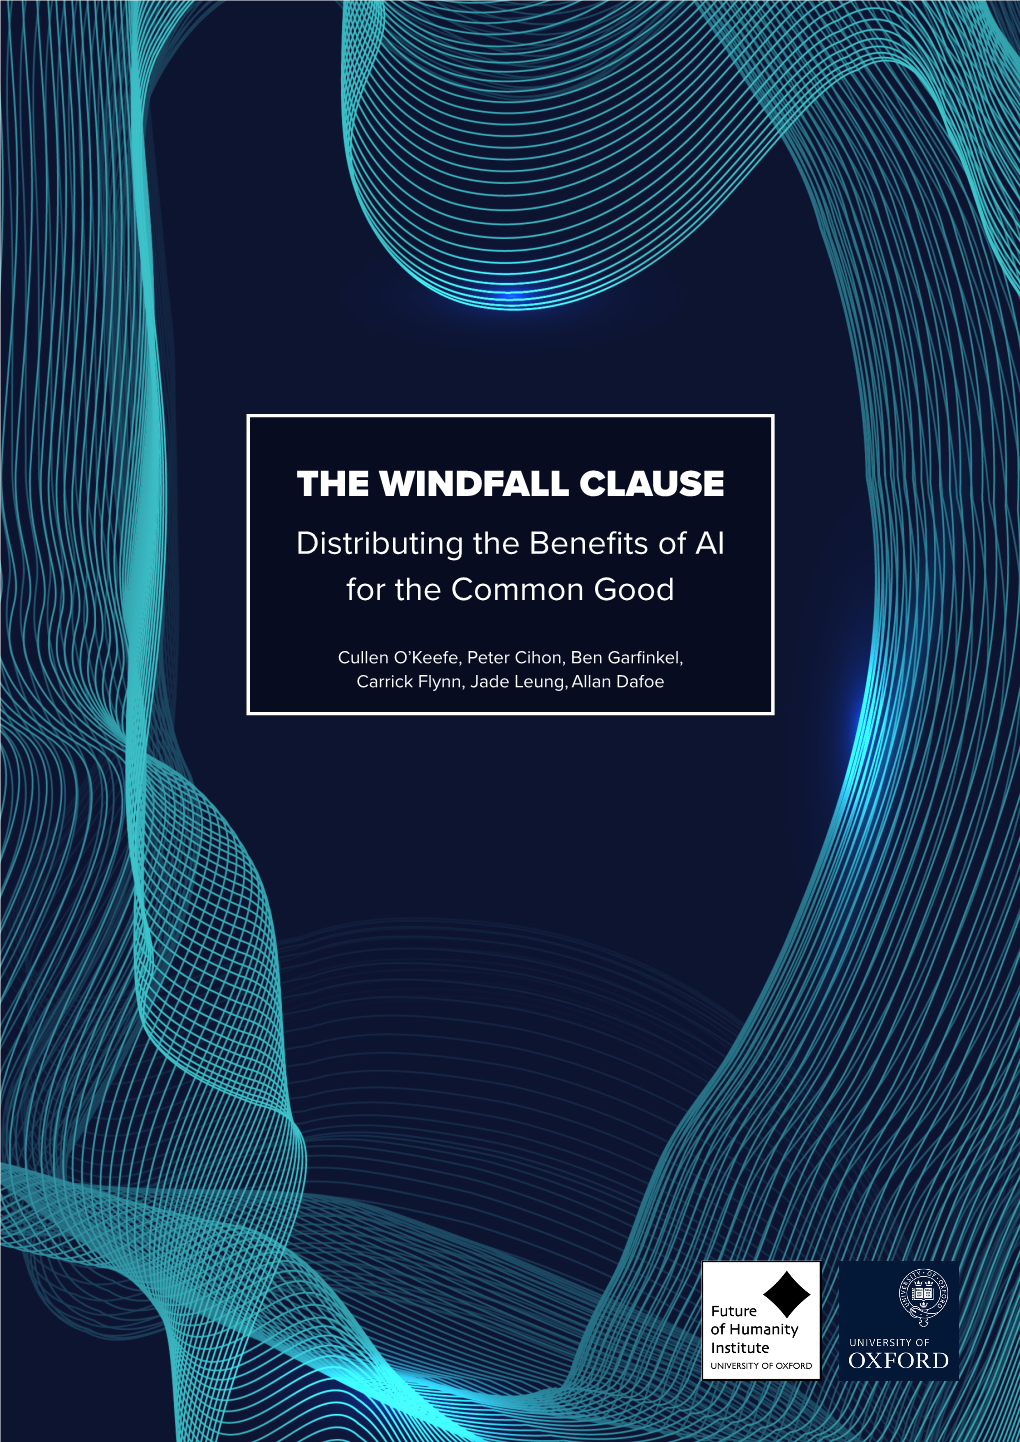 THE WINDFALL CLAUSE Distributing the Benefits of AI for the Common Good